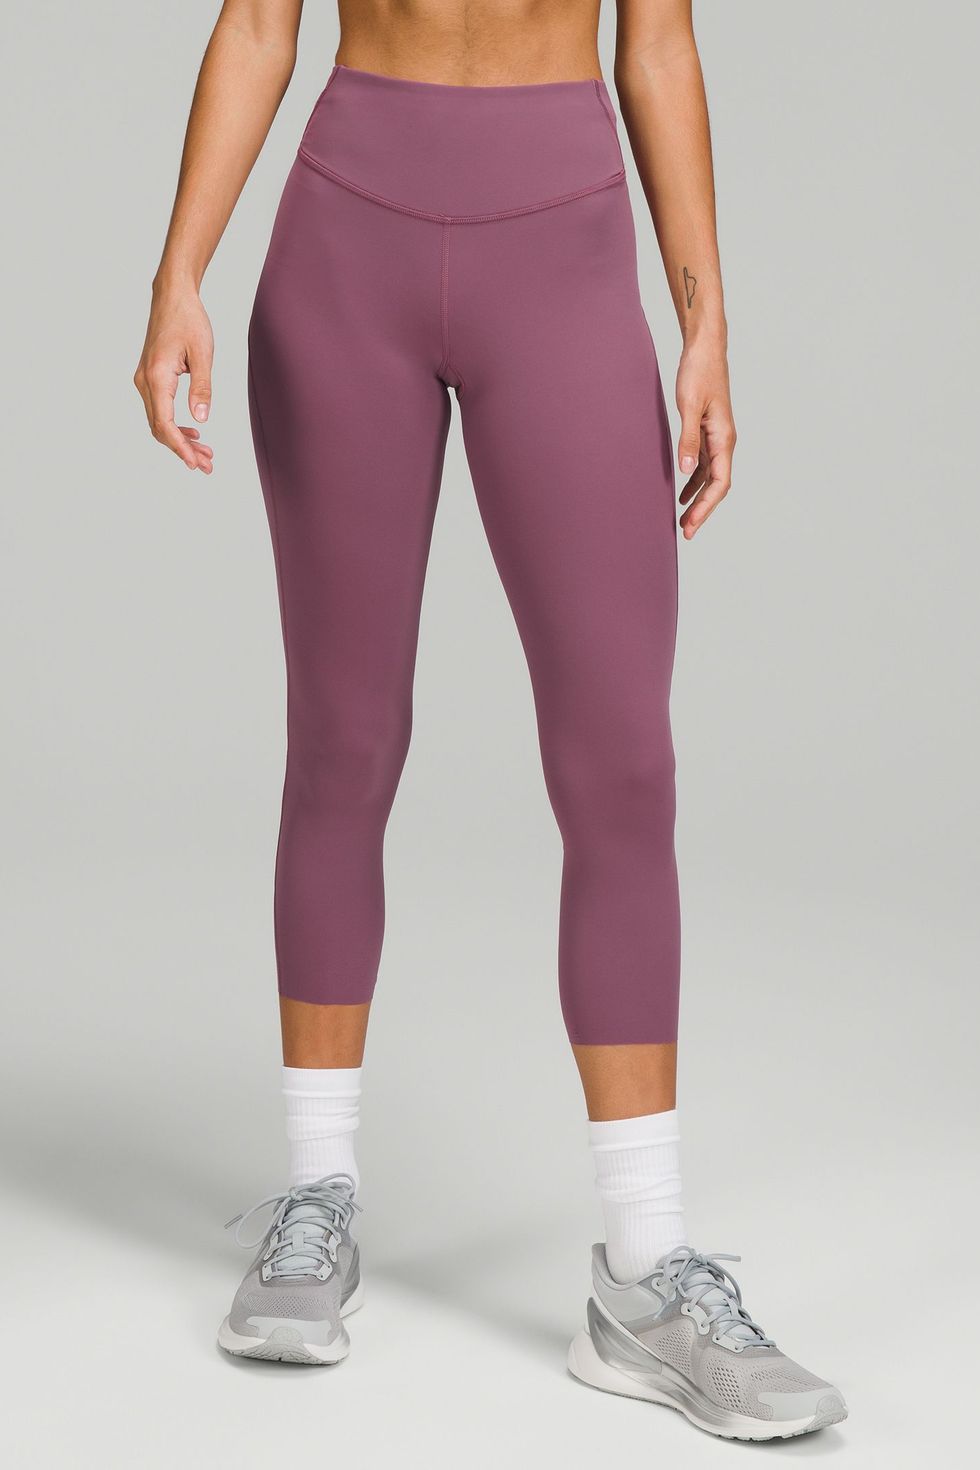 Lululemon Instill High-Rise Tight 25” Purple Size 2 - $128 New With